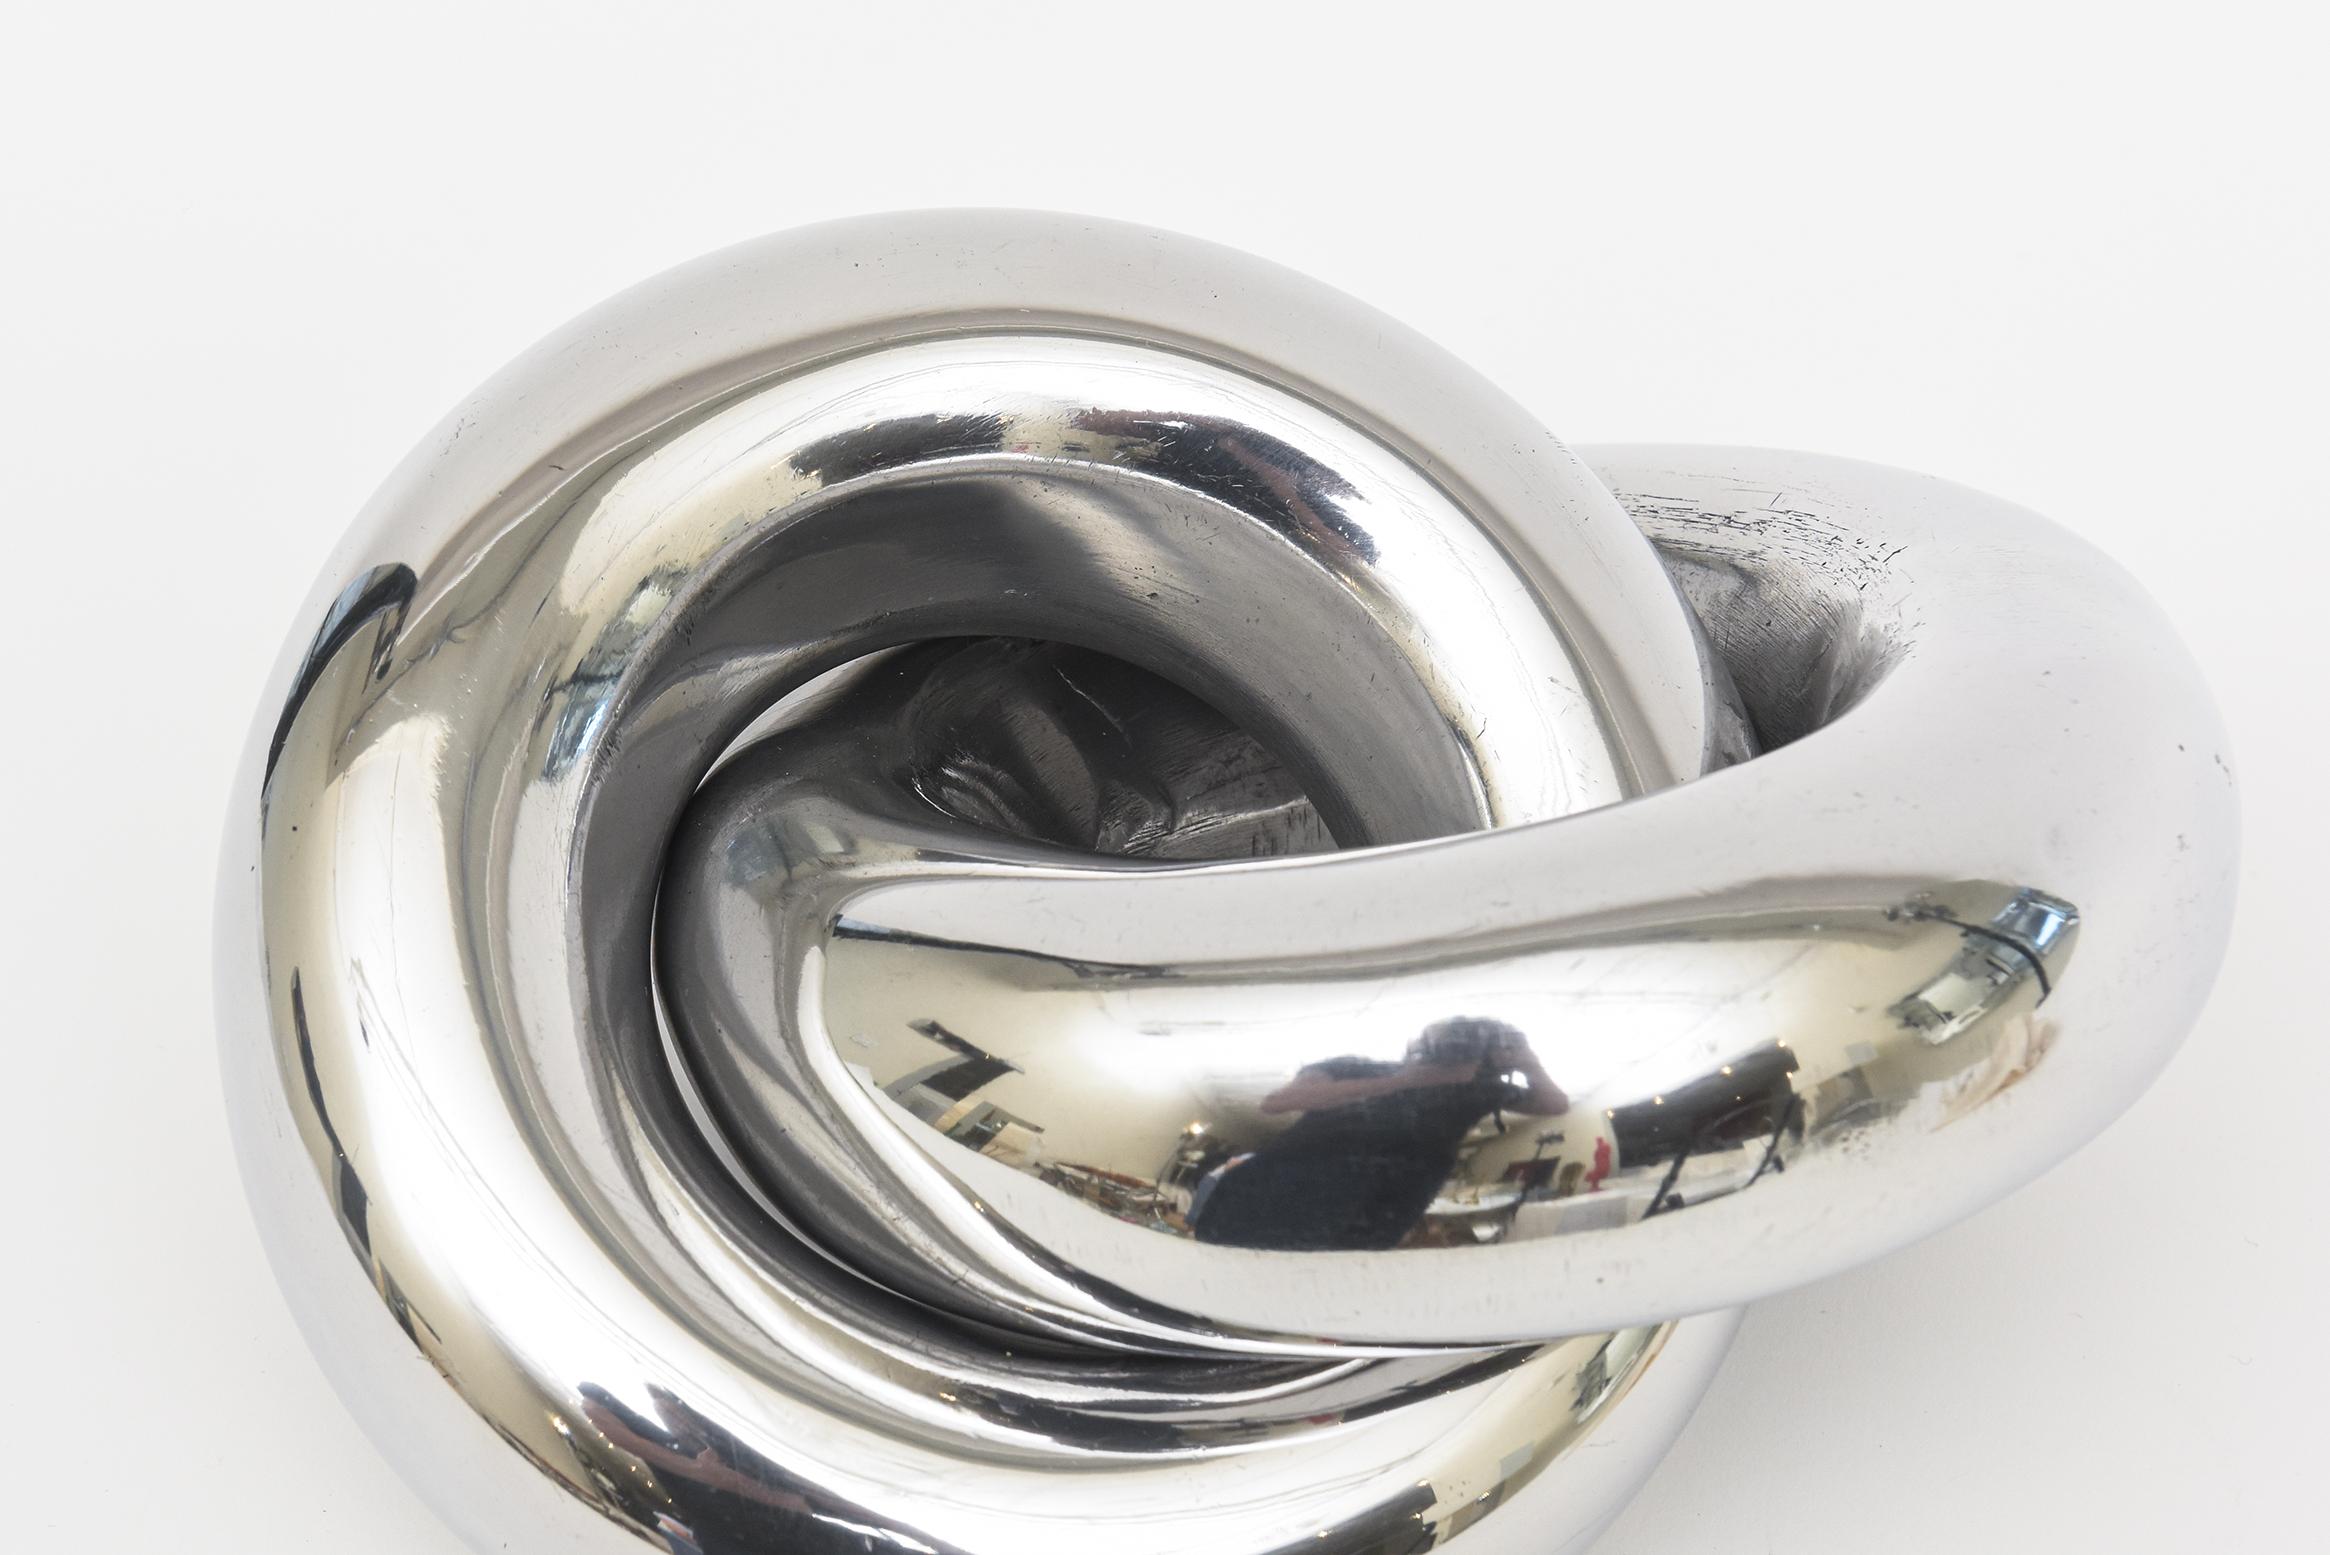 Vintage Twisted Intertwined Chrome Ring Sculpture For Sale 1